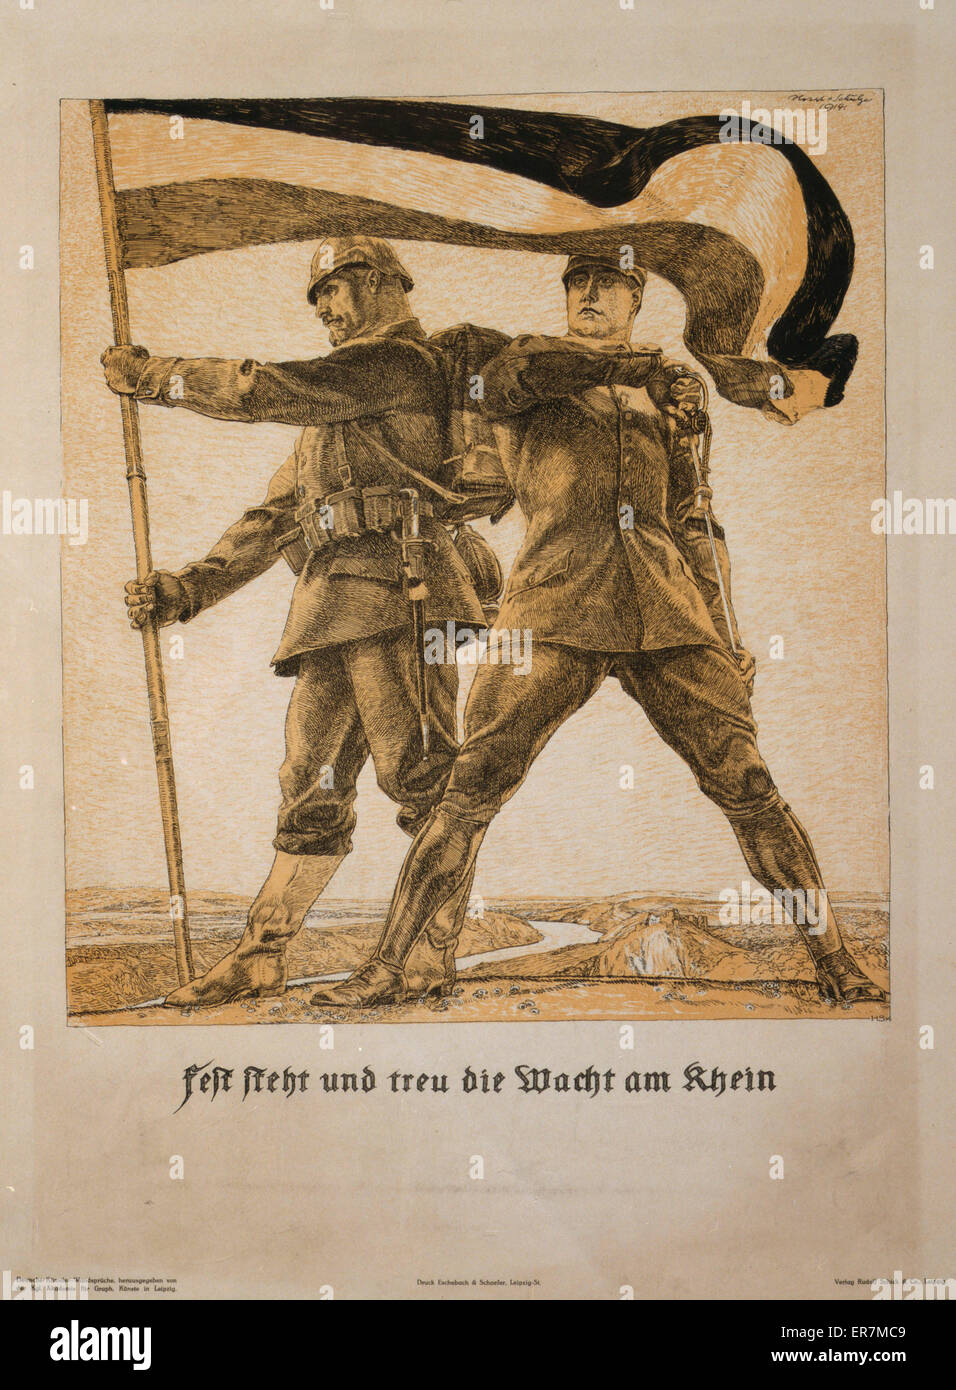 Fest steht und treu die Wacht am Rhein. Poster shows two soldiers, one enlisted holding a flag, the other an officer drawing his sword, standing astride German land near the Rhine River. Text: The watch on the Rhein remains firm and loyal. Date 1914. Stock Photo